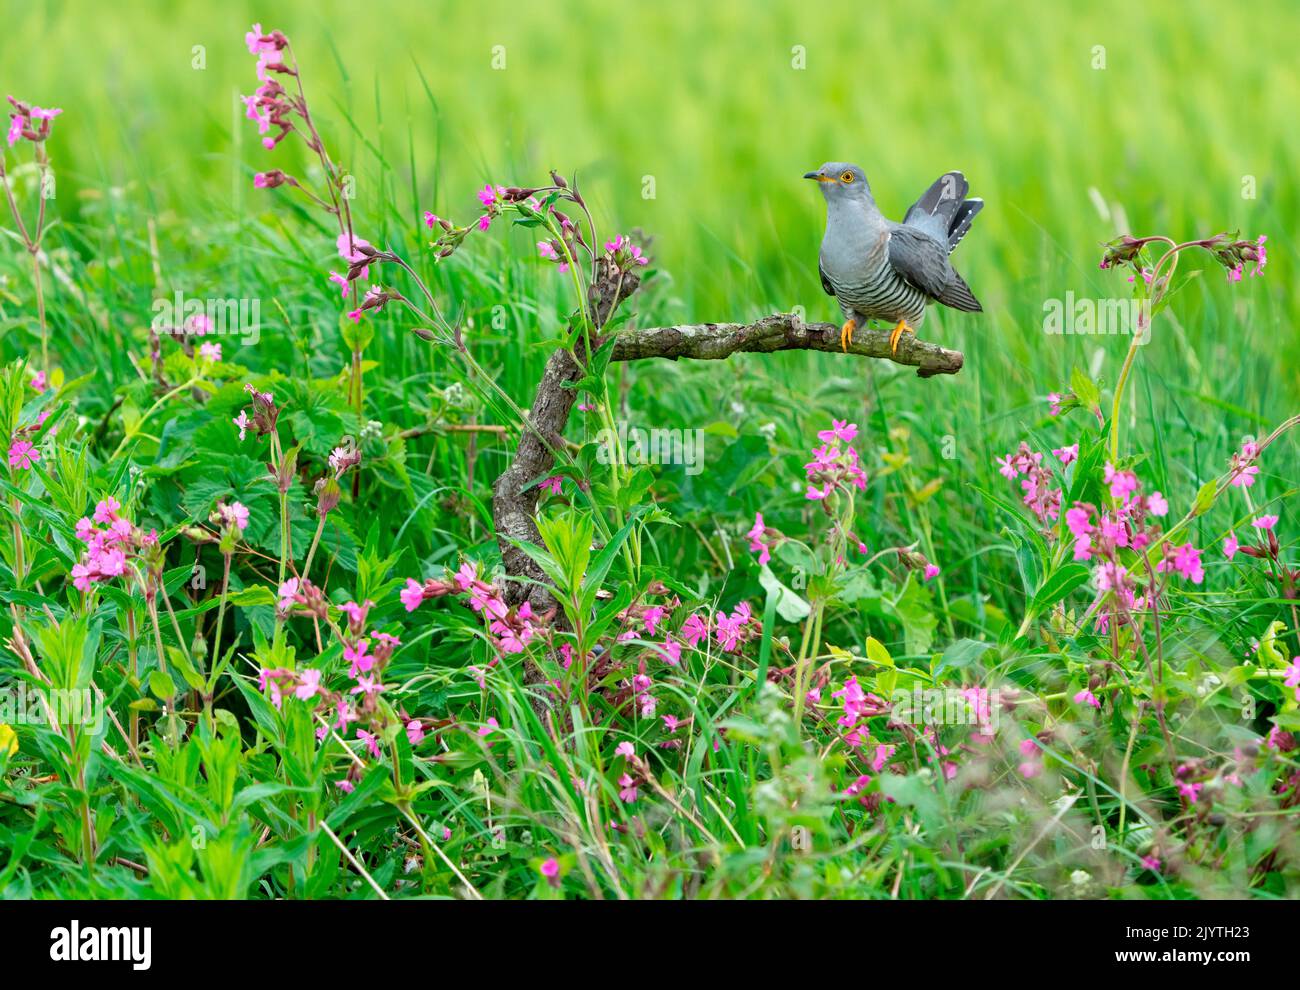 Cuckoo (Cuculus canorus) perched on a branch amongst flowers, England Stock Photo